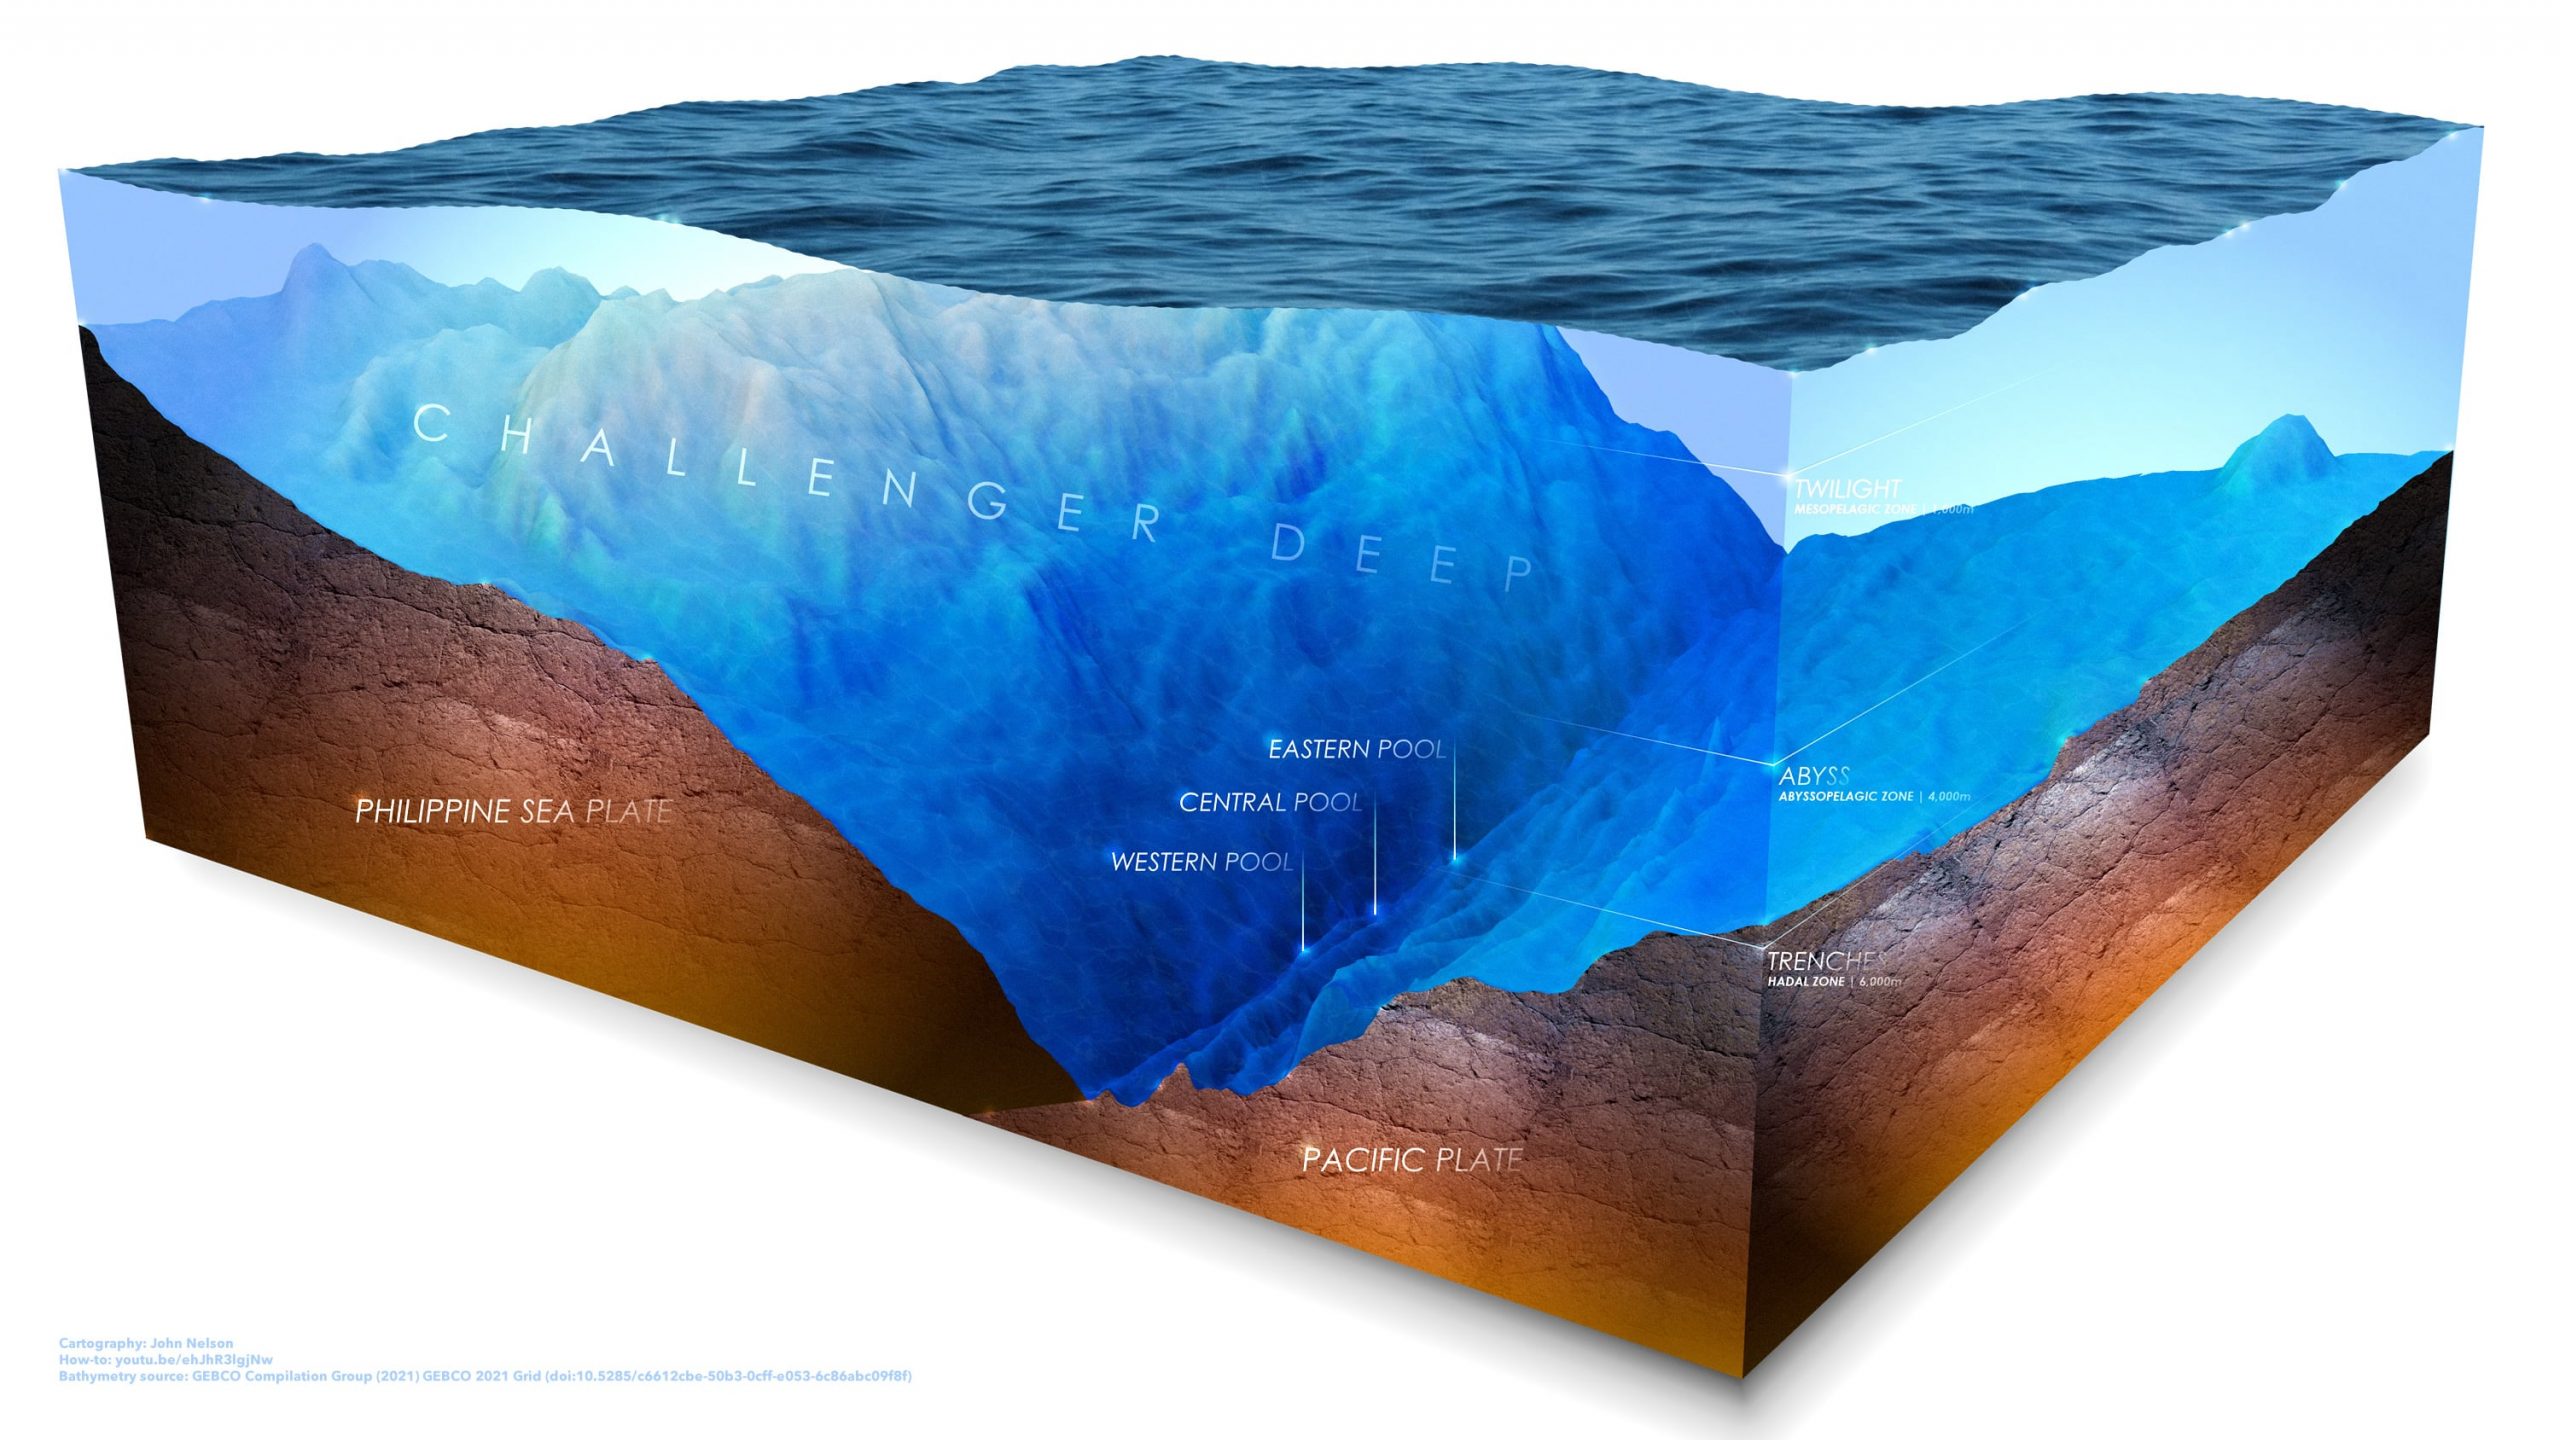  a diorama of Challenge Deep, the deepest point in the ocean.